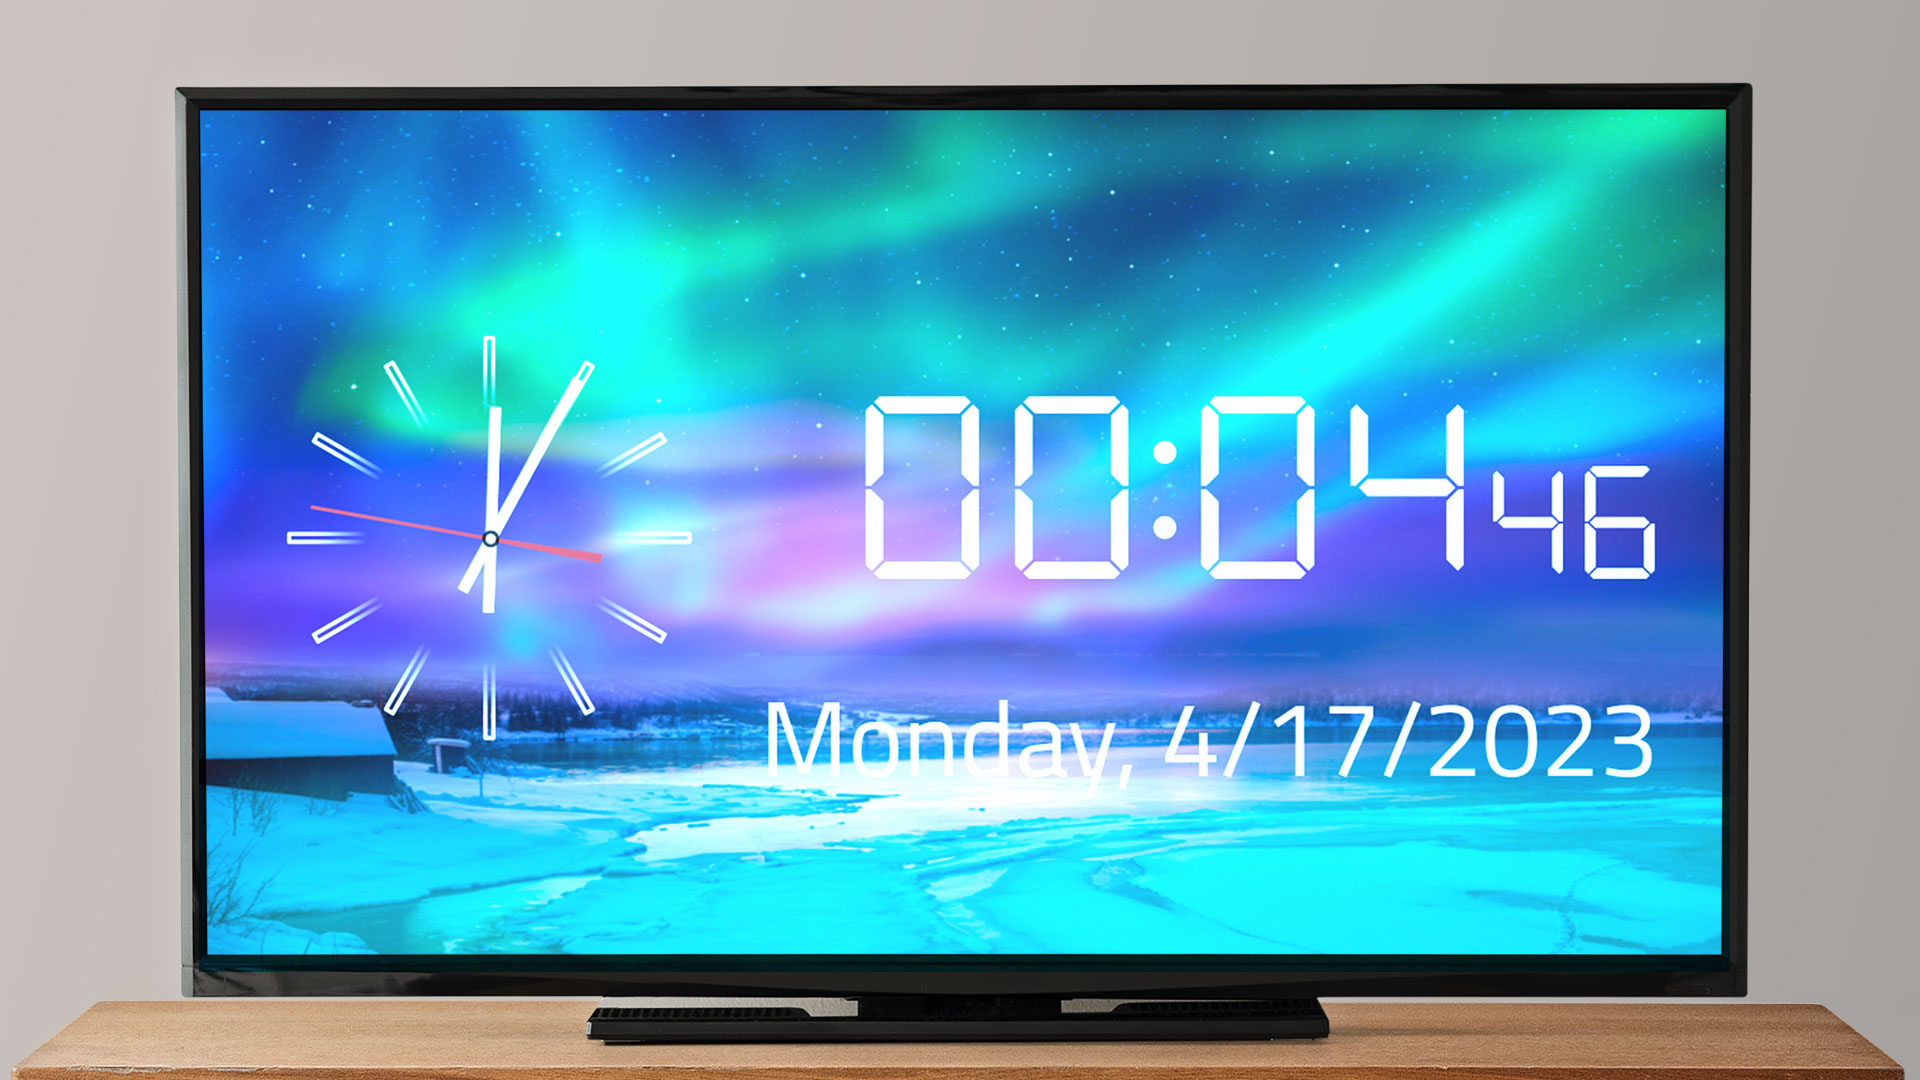 Aurora Borealis And Northern Lights HD Clock: Analog and Digital Clock Screensaver for Fire TV and Tablet - NO ADS